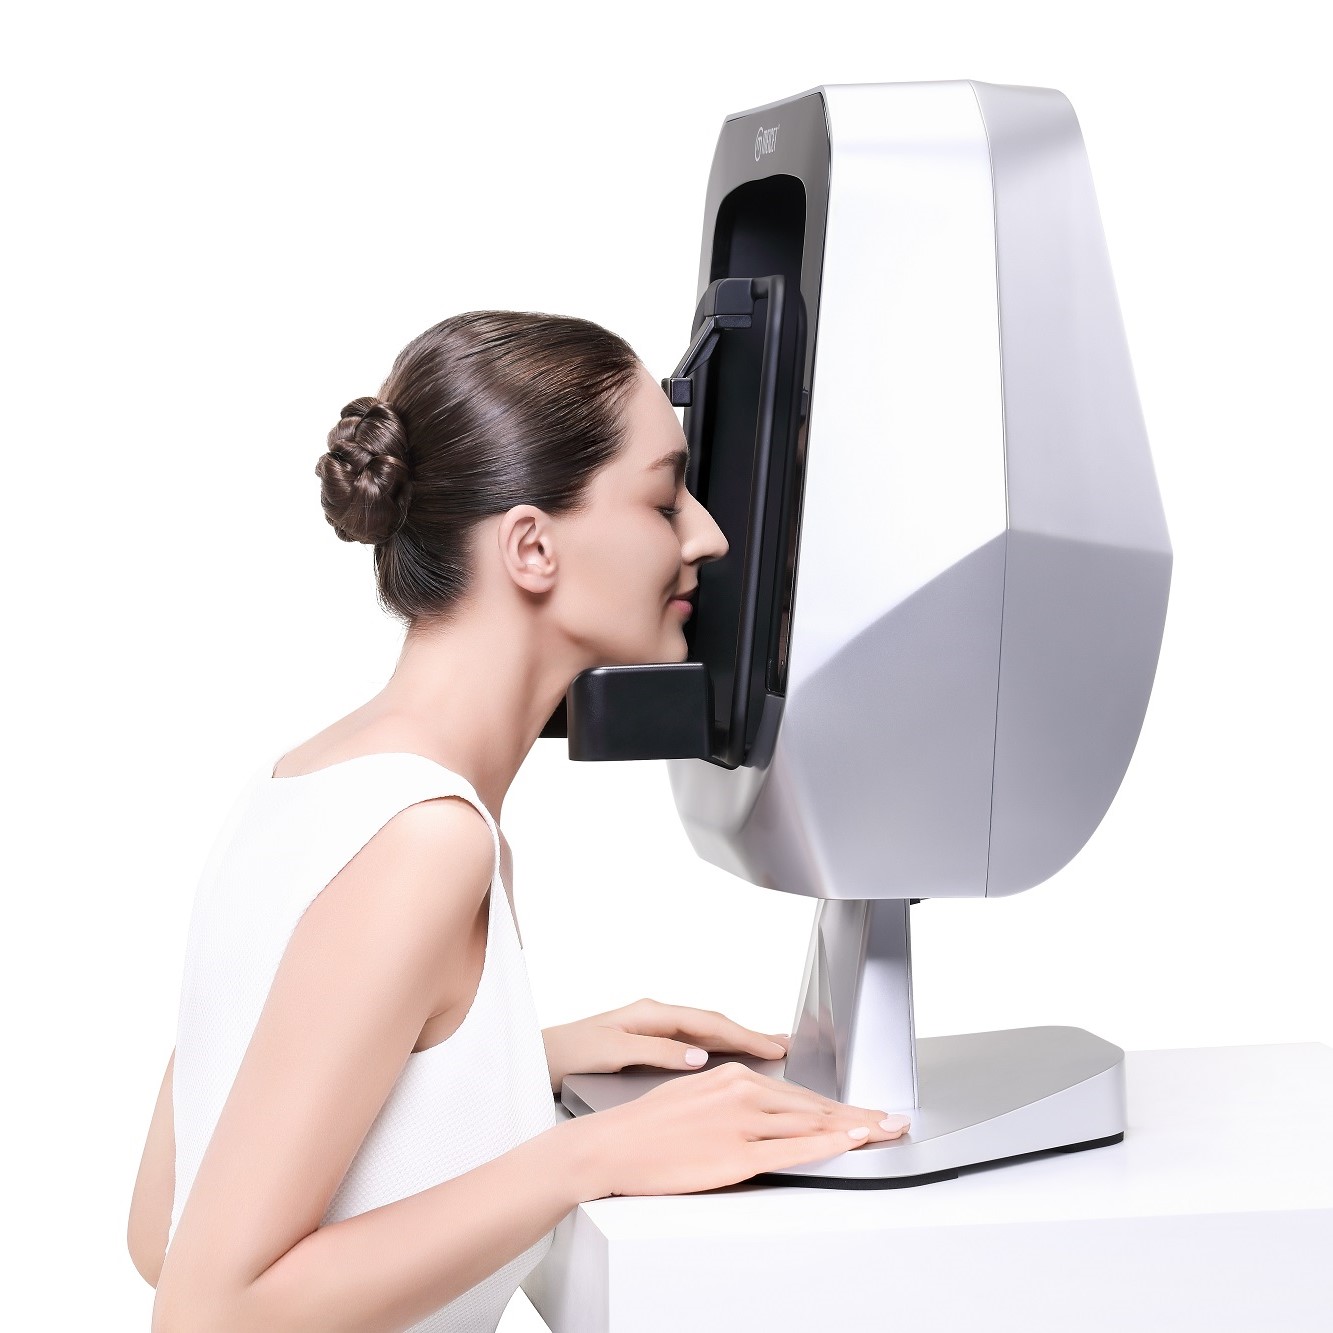 Meicet 3D Full Facial Skin Analyzer Commercial Use MC88